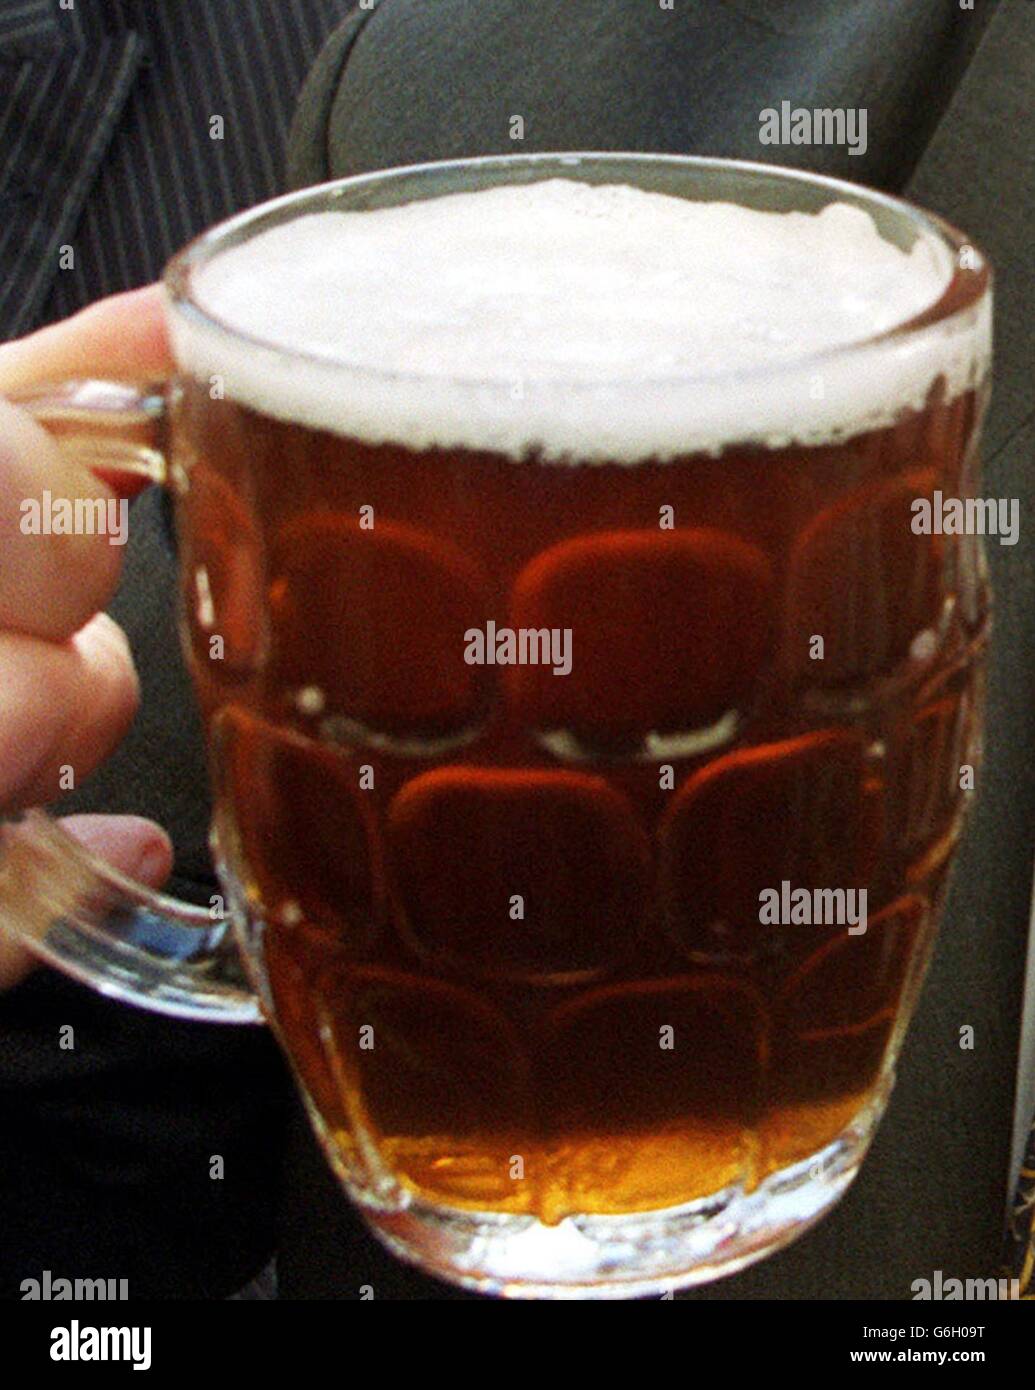 Generic picture of a tradional, dimpled pint glass. Health officials, urged ale lovers to drink sensibly following a new scientific study which found no link between a few pints each week and a beer belly. * The Department of Health said the study of Czech drinkers which found that women who enjoy ale actually weighed less was not a green light for people to binge. 02/10/2003: Almost half the money spent on leisure outside the home goes on drinks down the pub, according to a report published. The 17.5 billion paid out for drinks last year is more than double the 7.2 billion spent on Stock Photo